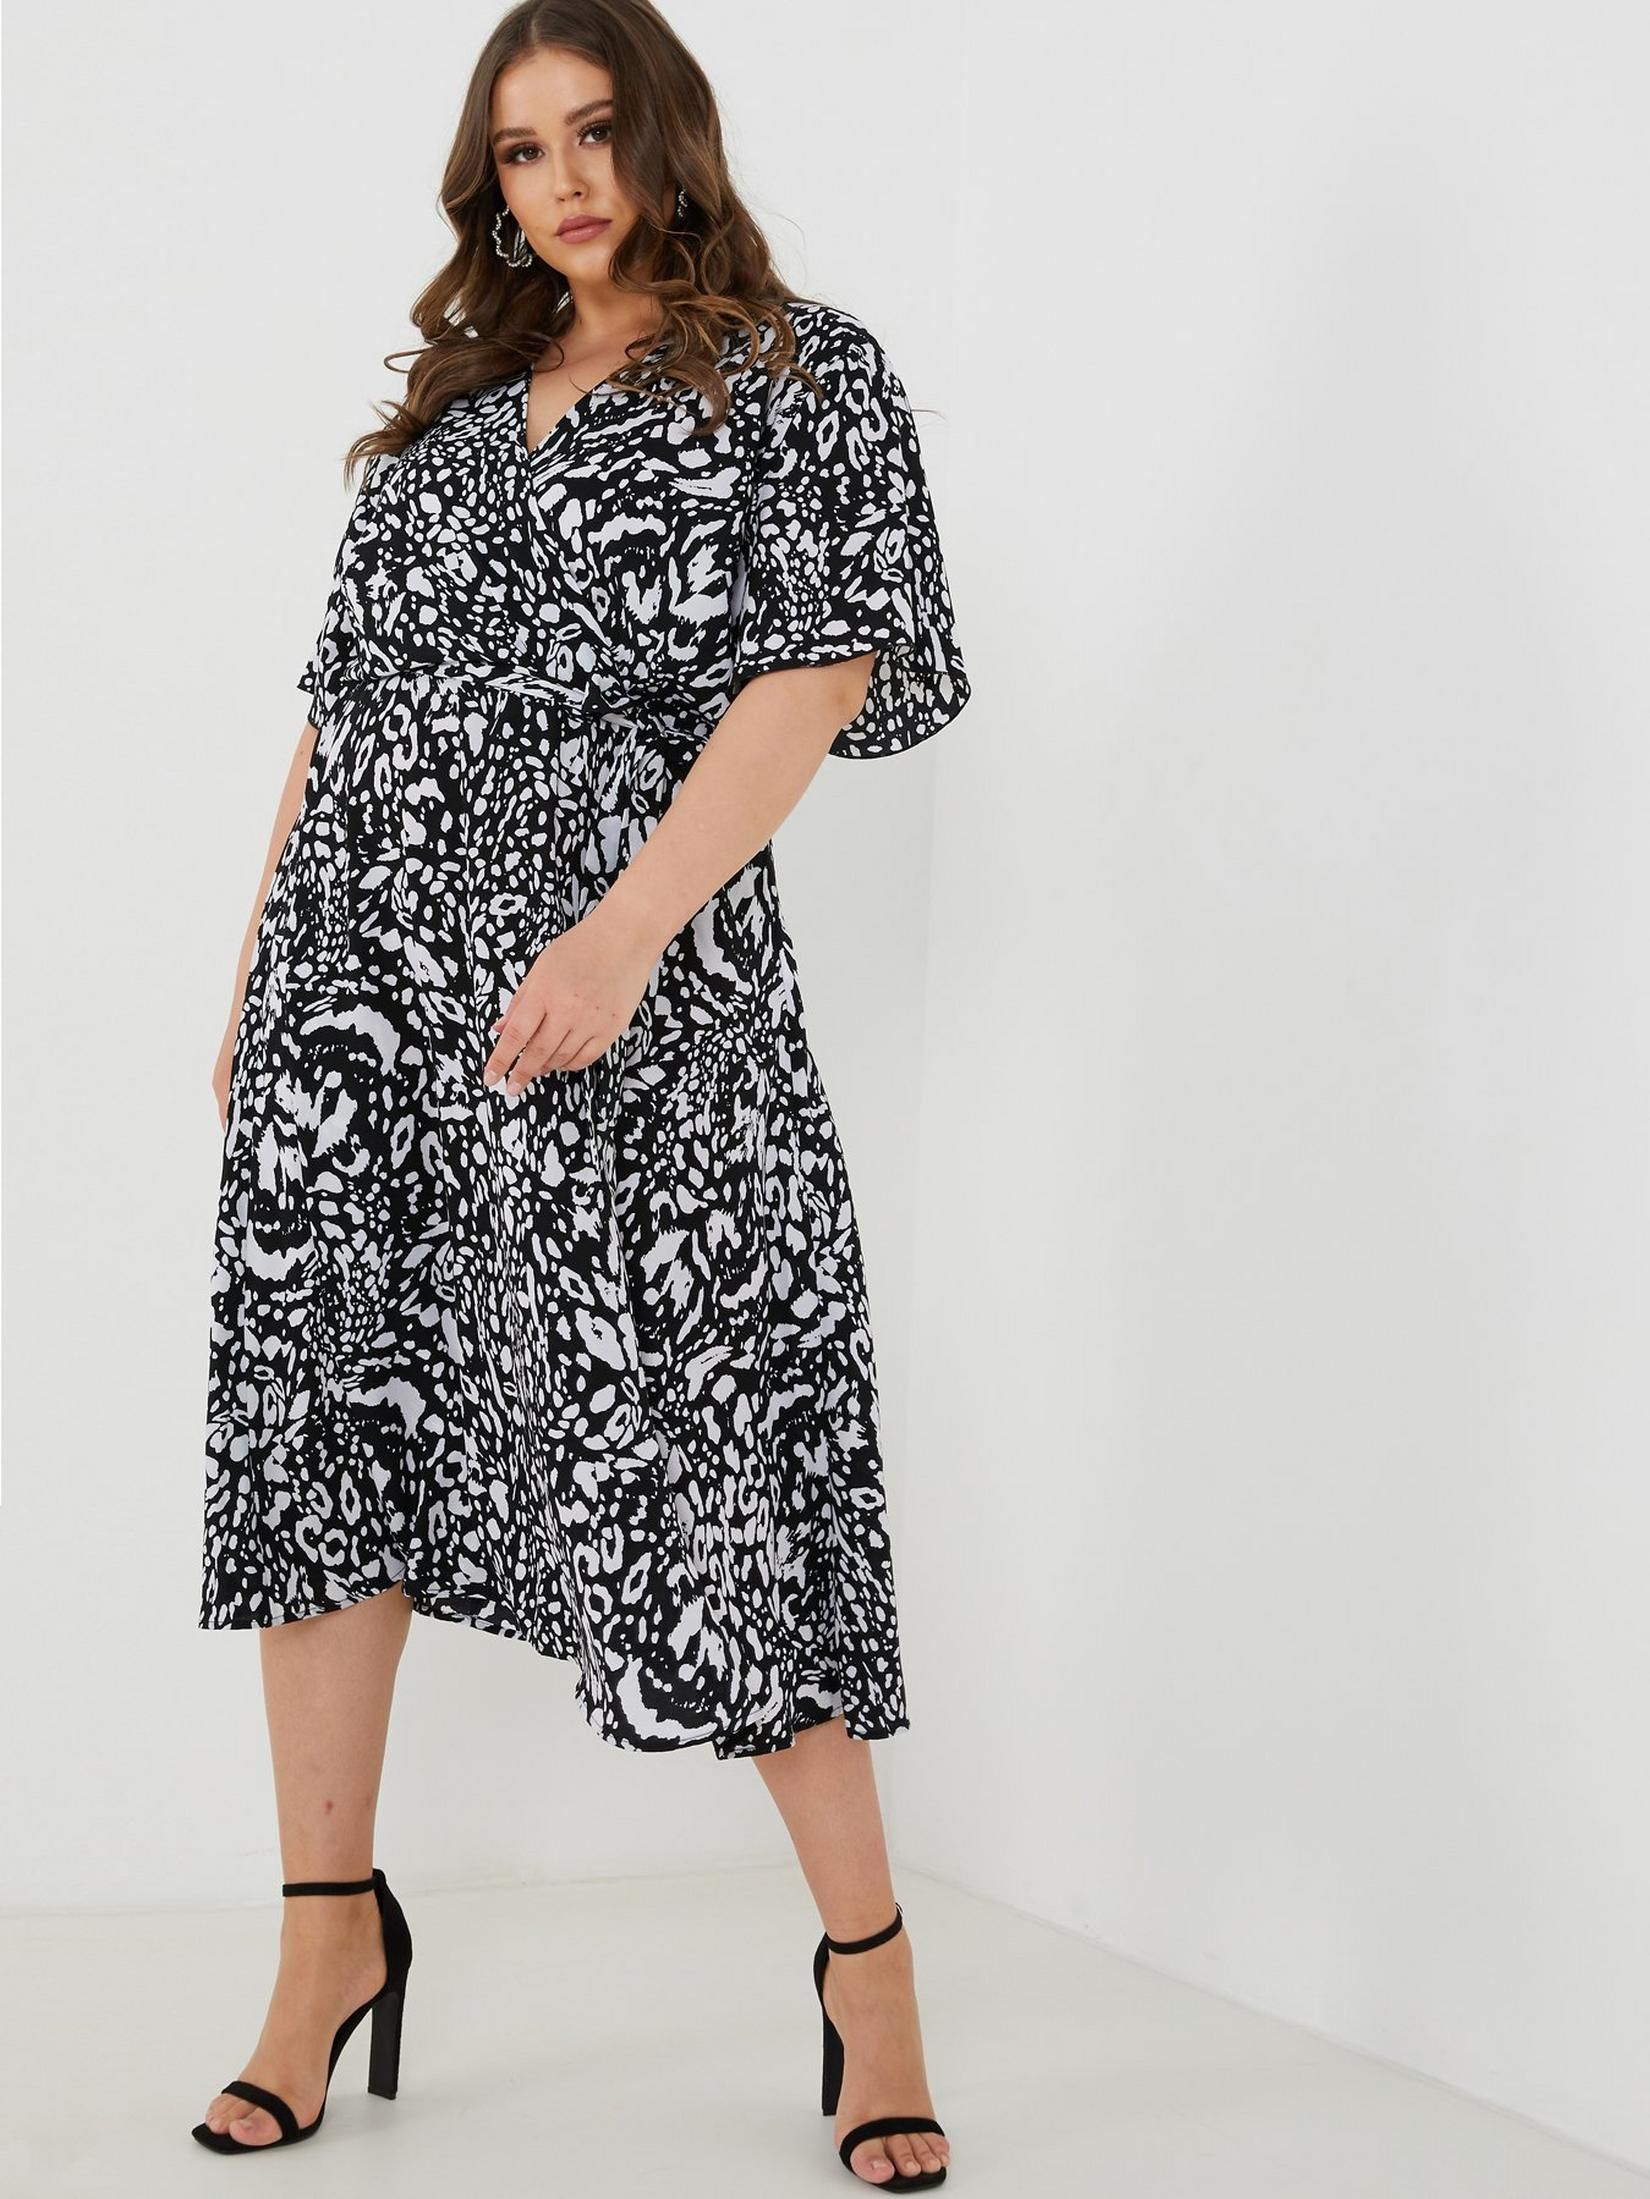 wedding guest dresses black and white